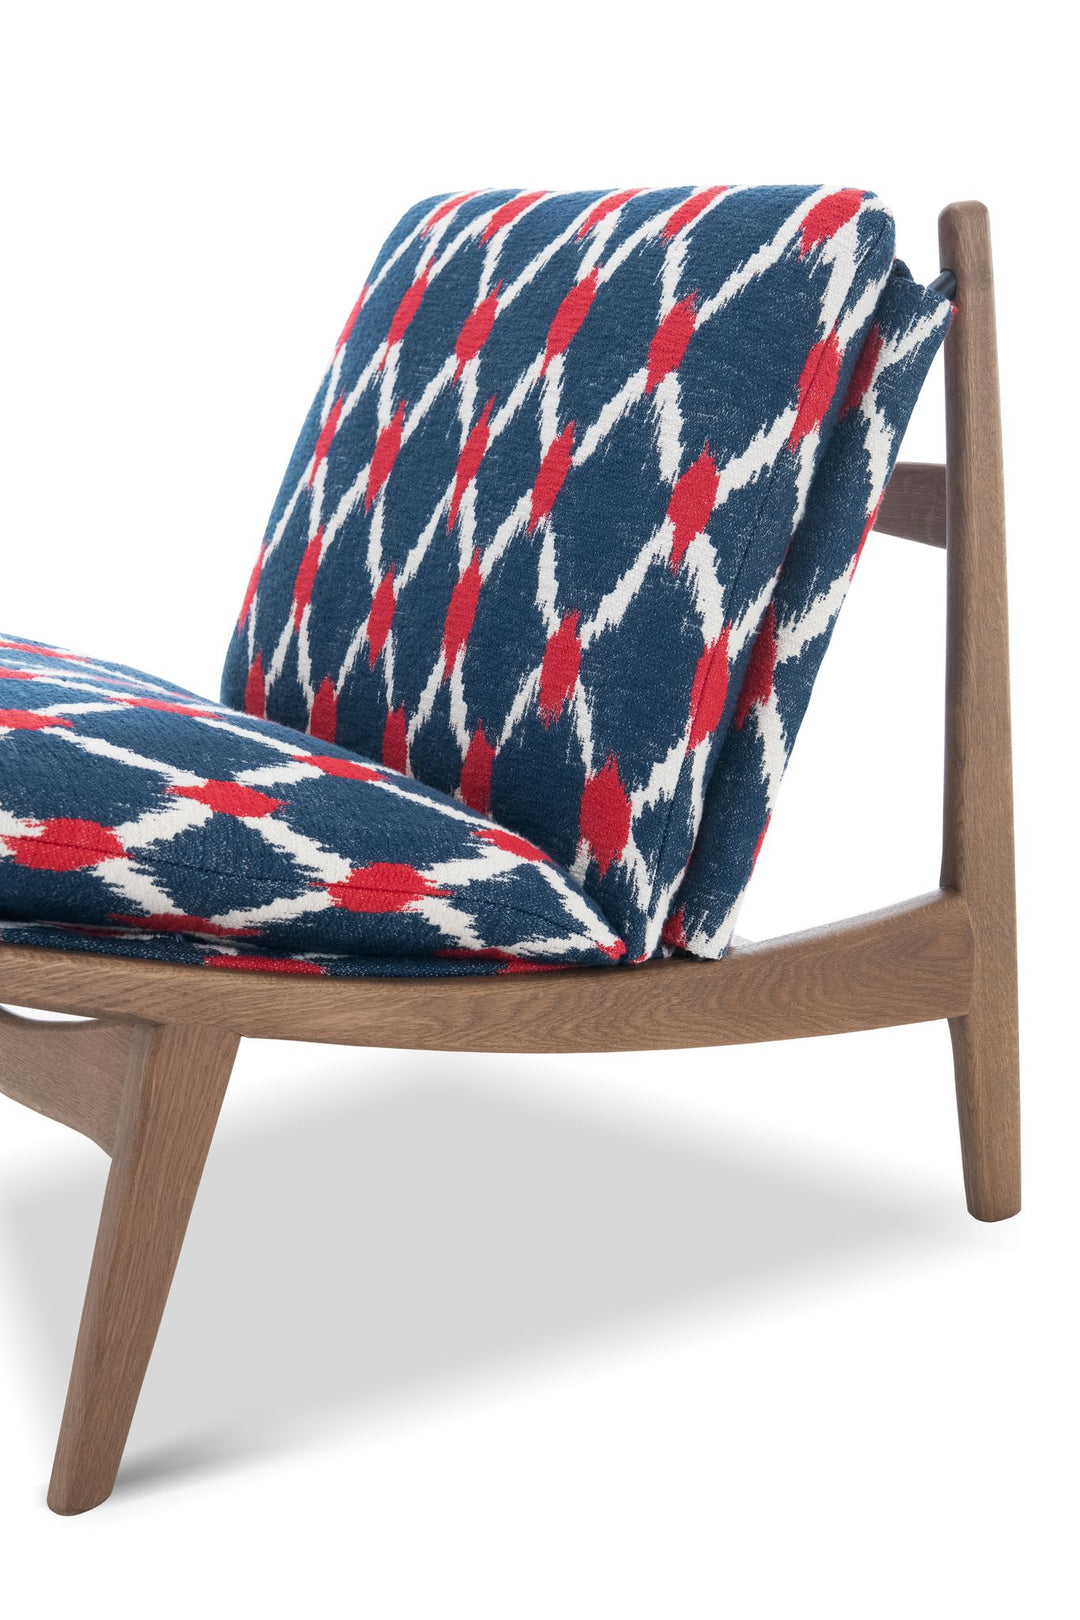 mind-the-gap-red-blue-white-jacquard-design-woven-fabric-stylish-chair-luxury-furniture-designer-high-end-wooden-frame